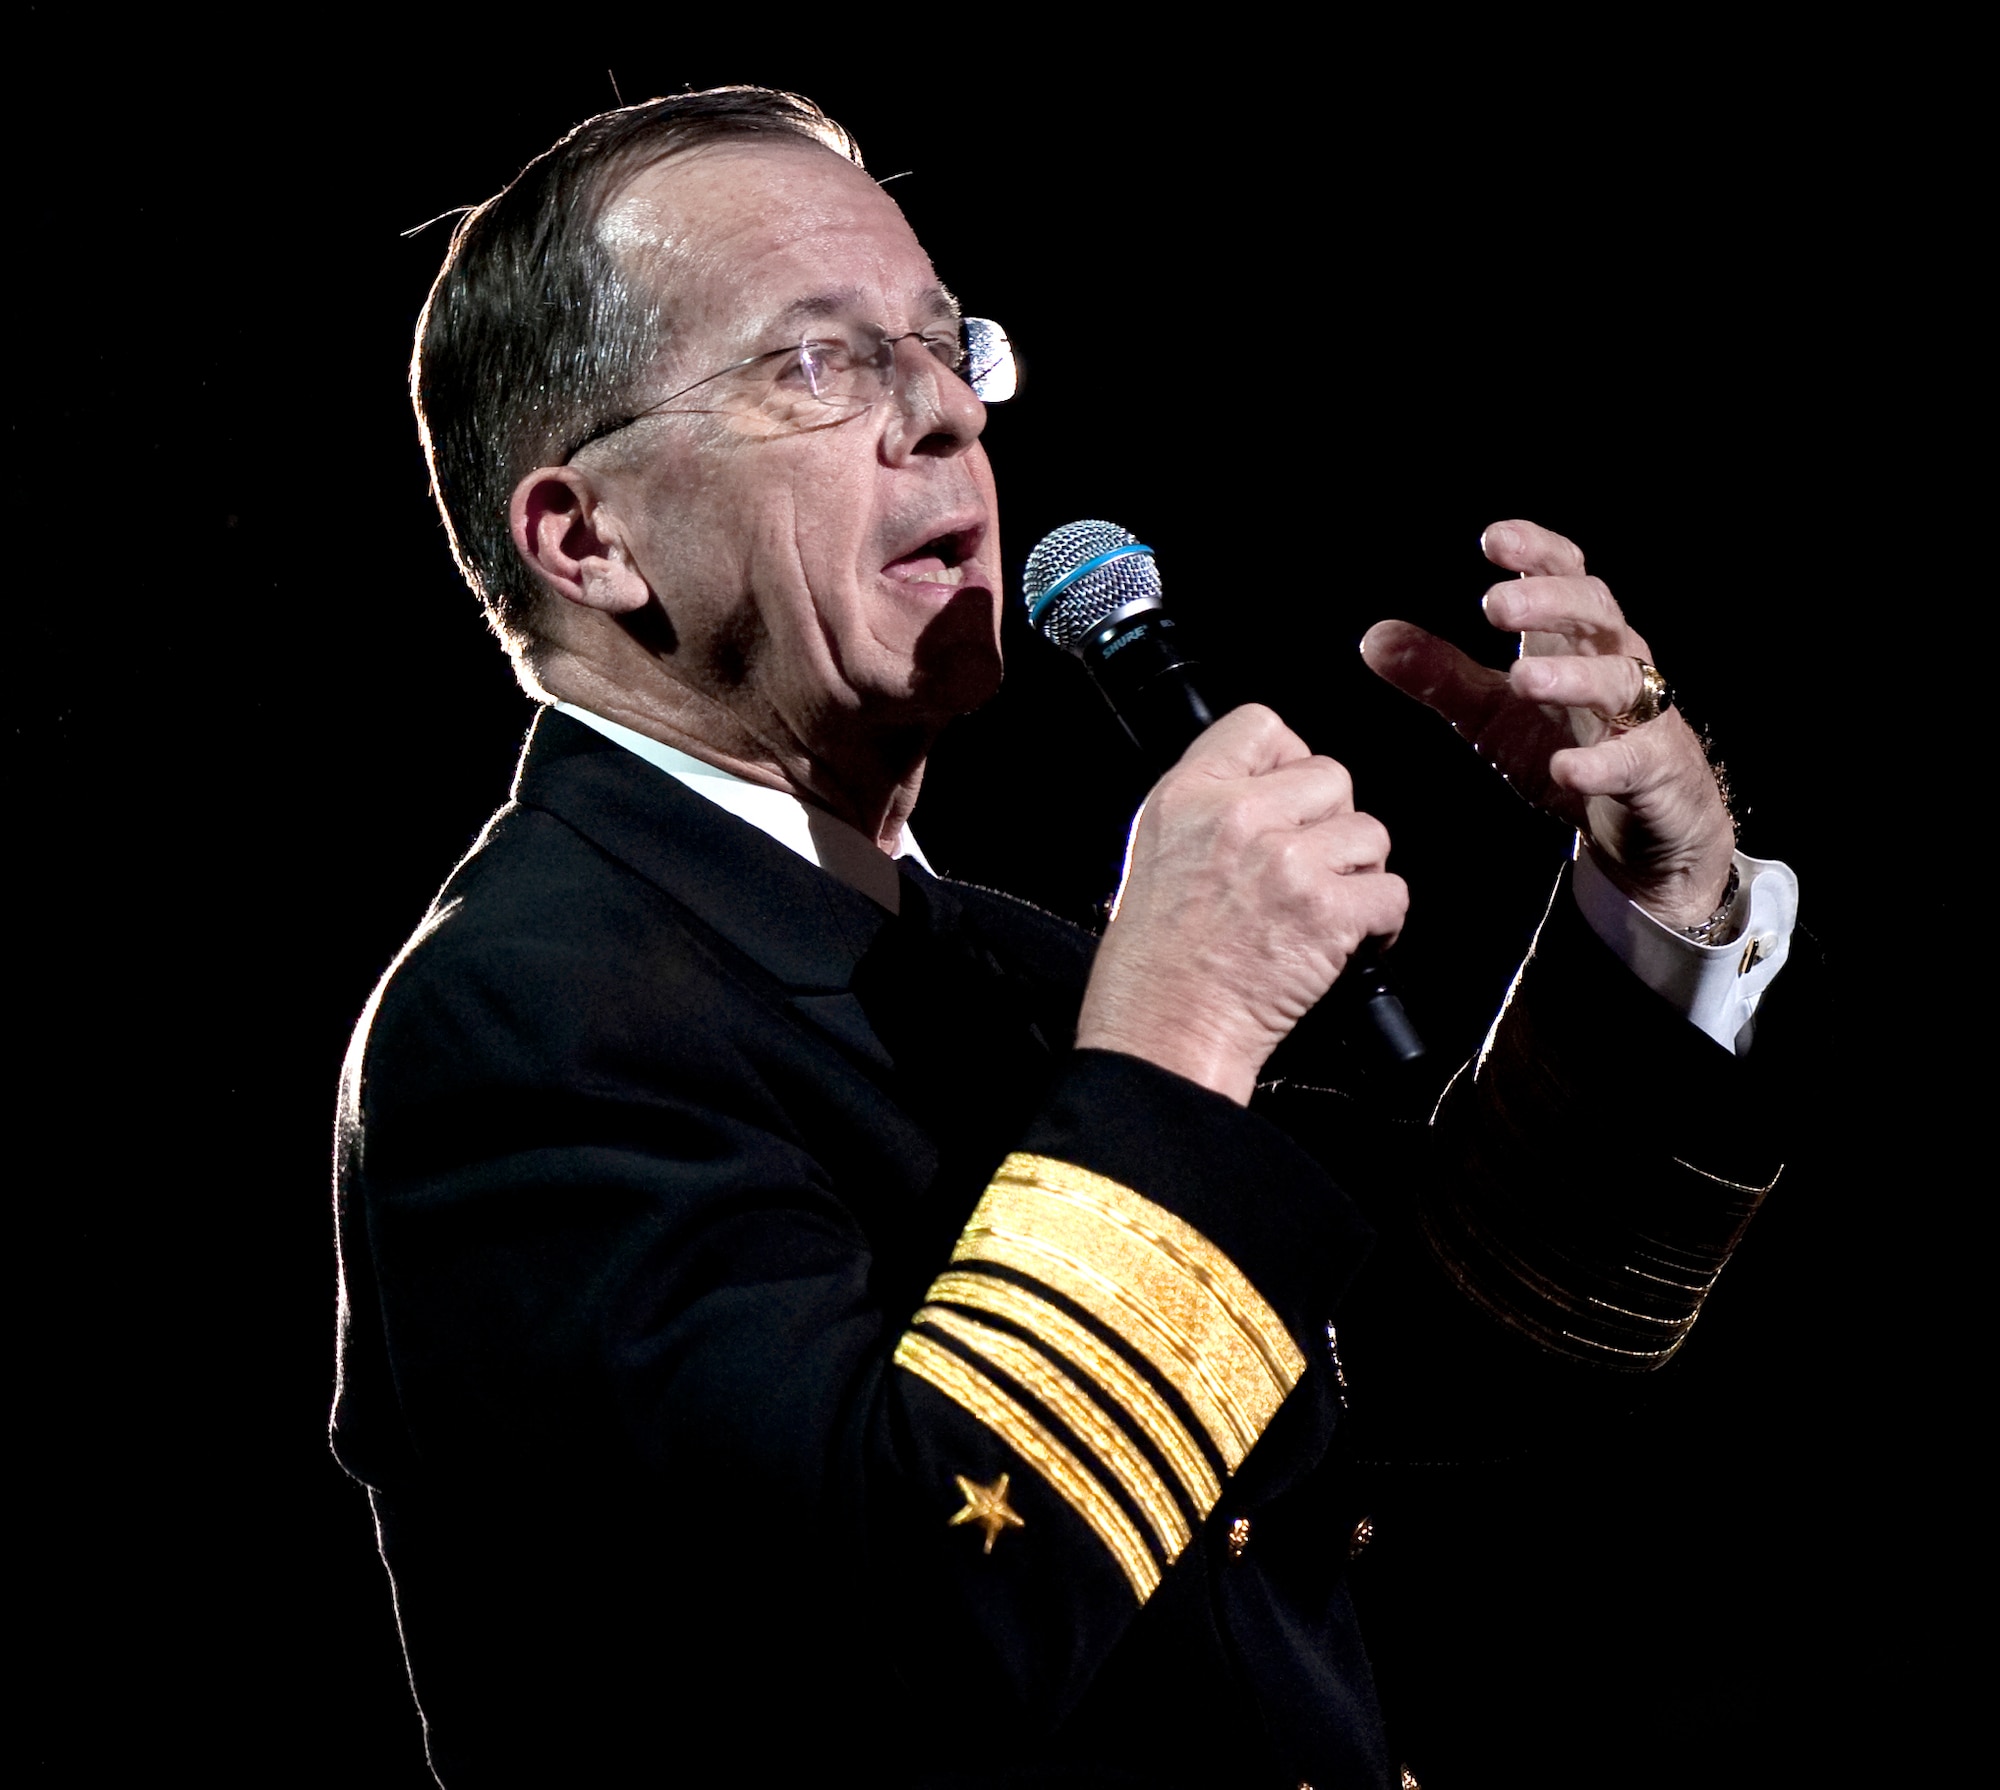 Navy Adm. Mike Mullen, chairman of the Joint Chiefs of Staff, talks about the need to help homeless veterans May 9, 2011, to the audience at the 2011 Robin Hood Foundation Gala in New York City. The Robin Hood foundation has targeted poverty in New York City by supporting and developing organizations that provide direct services to poor New Yorkers. (Defense Department photo/Petty Officer 1st Class Chad J. McNeeley)